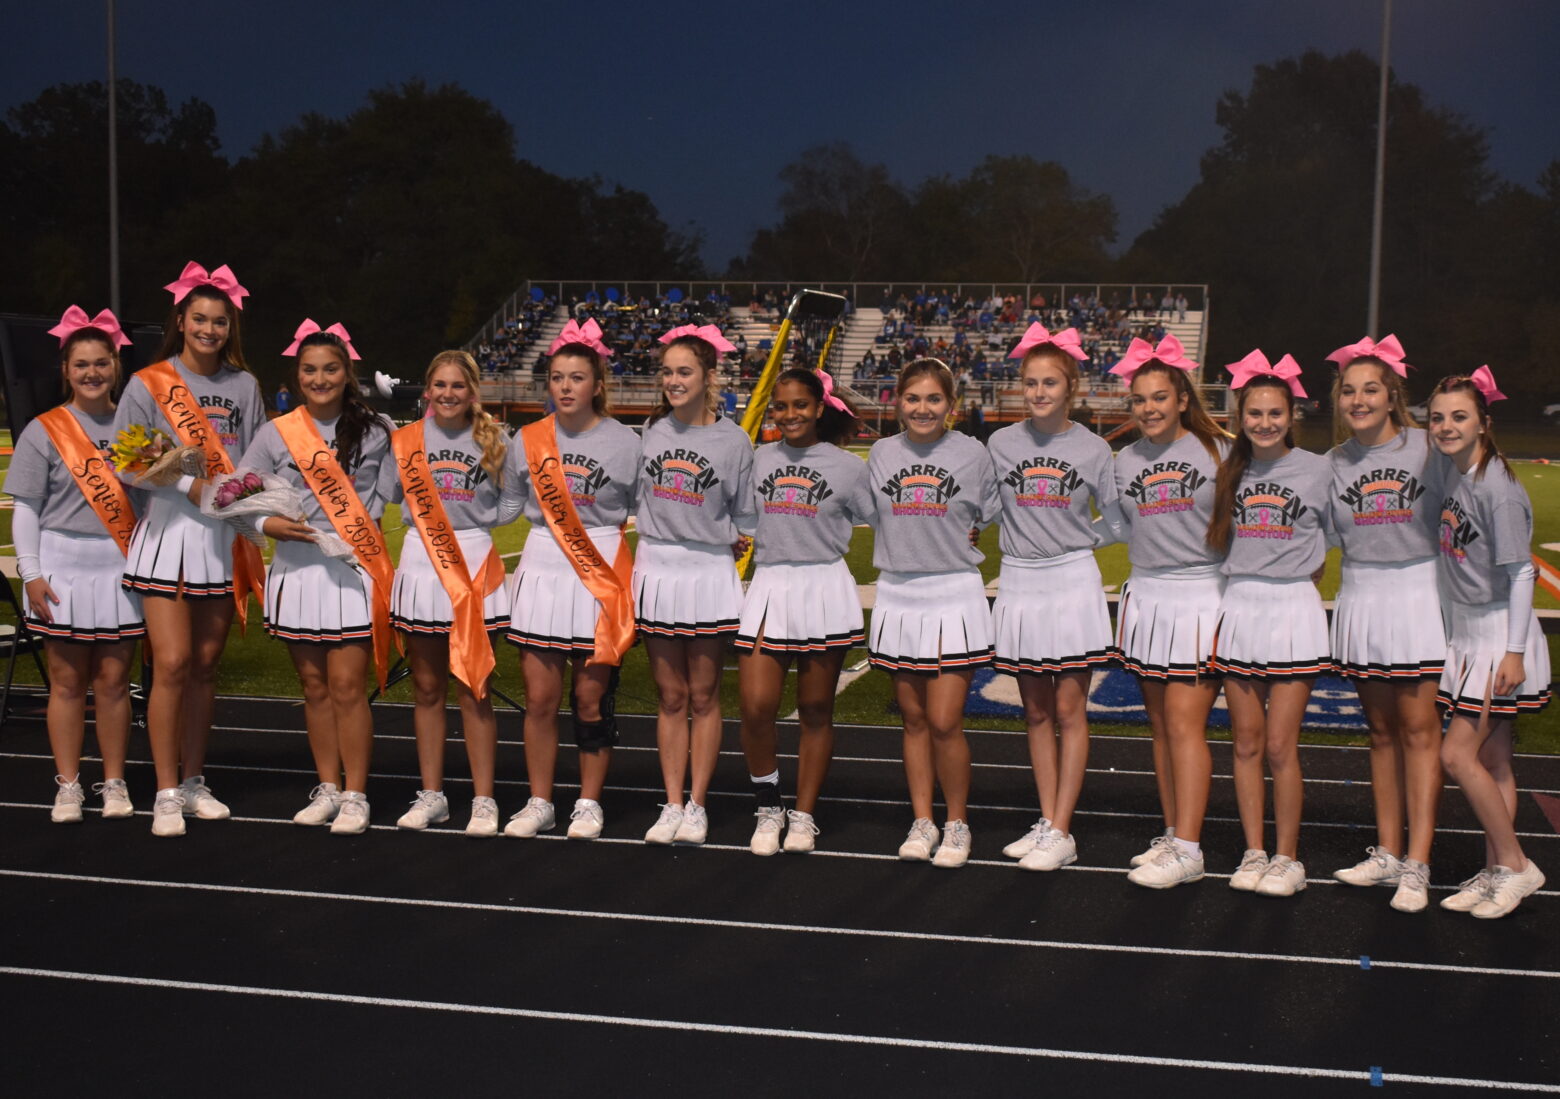 WHS recognizes seniors and scholar students prior to Friday night’s game